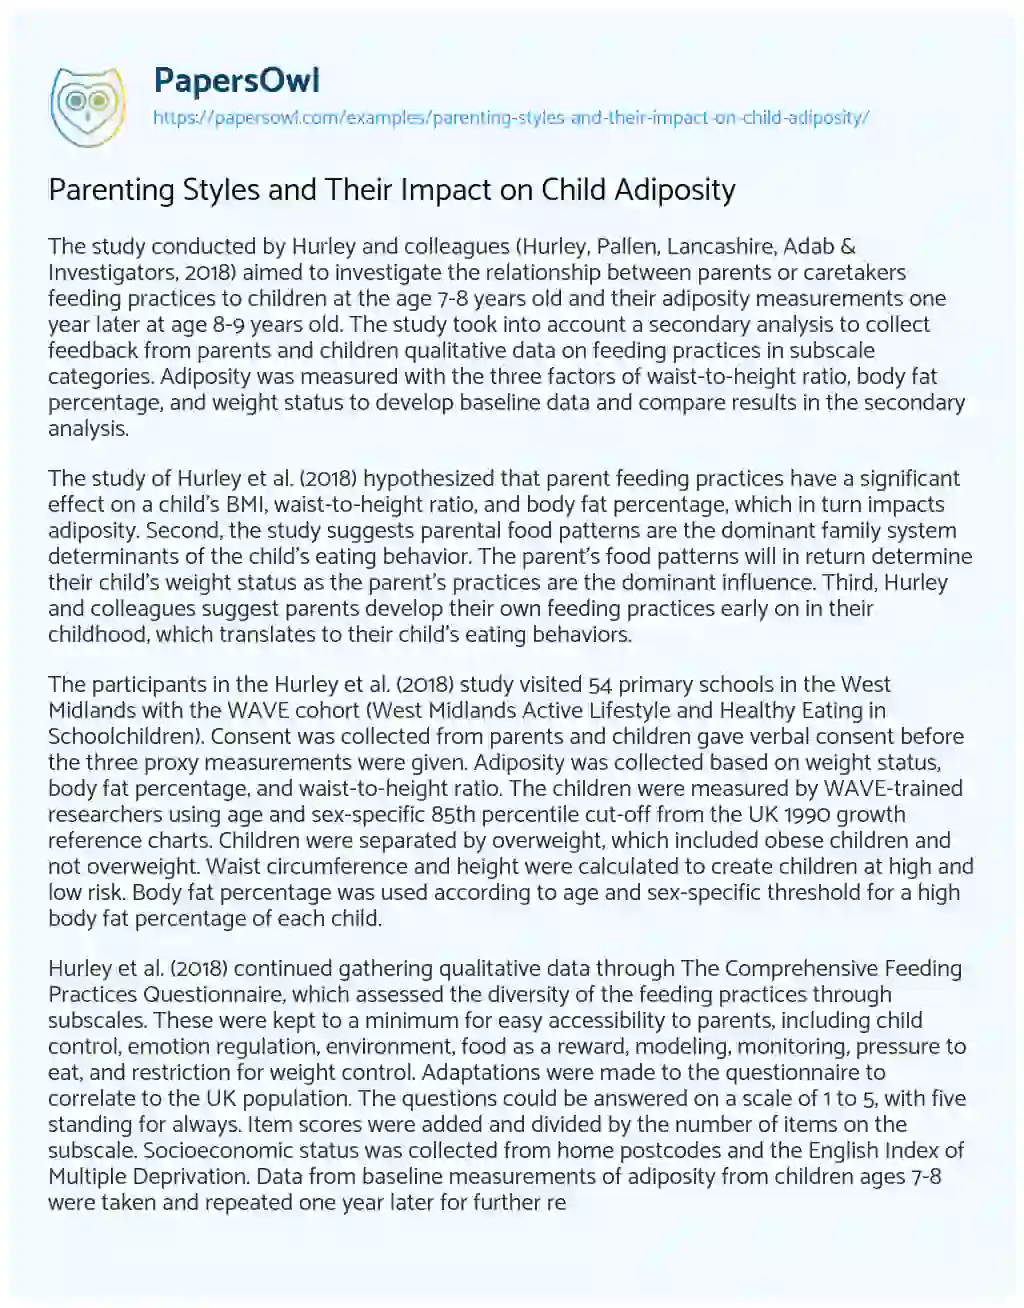 Essay on Parenting Styles and their Impact on Child Adiposity